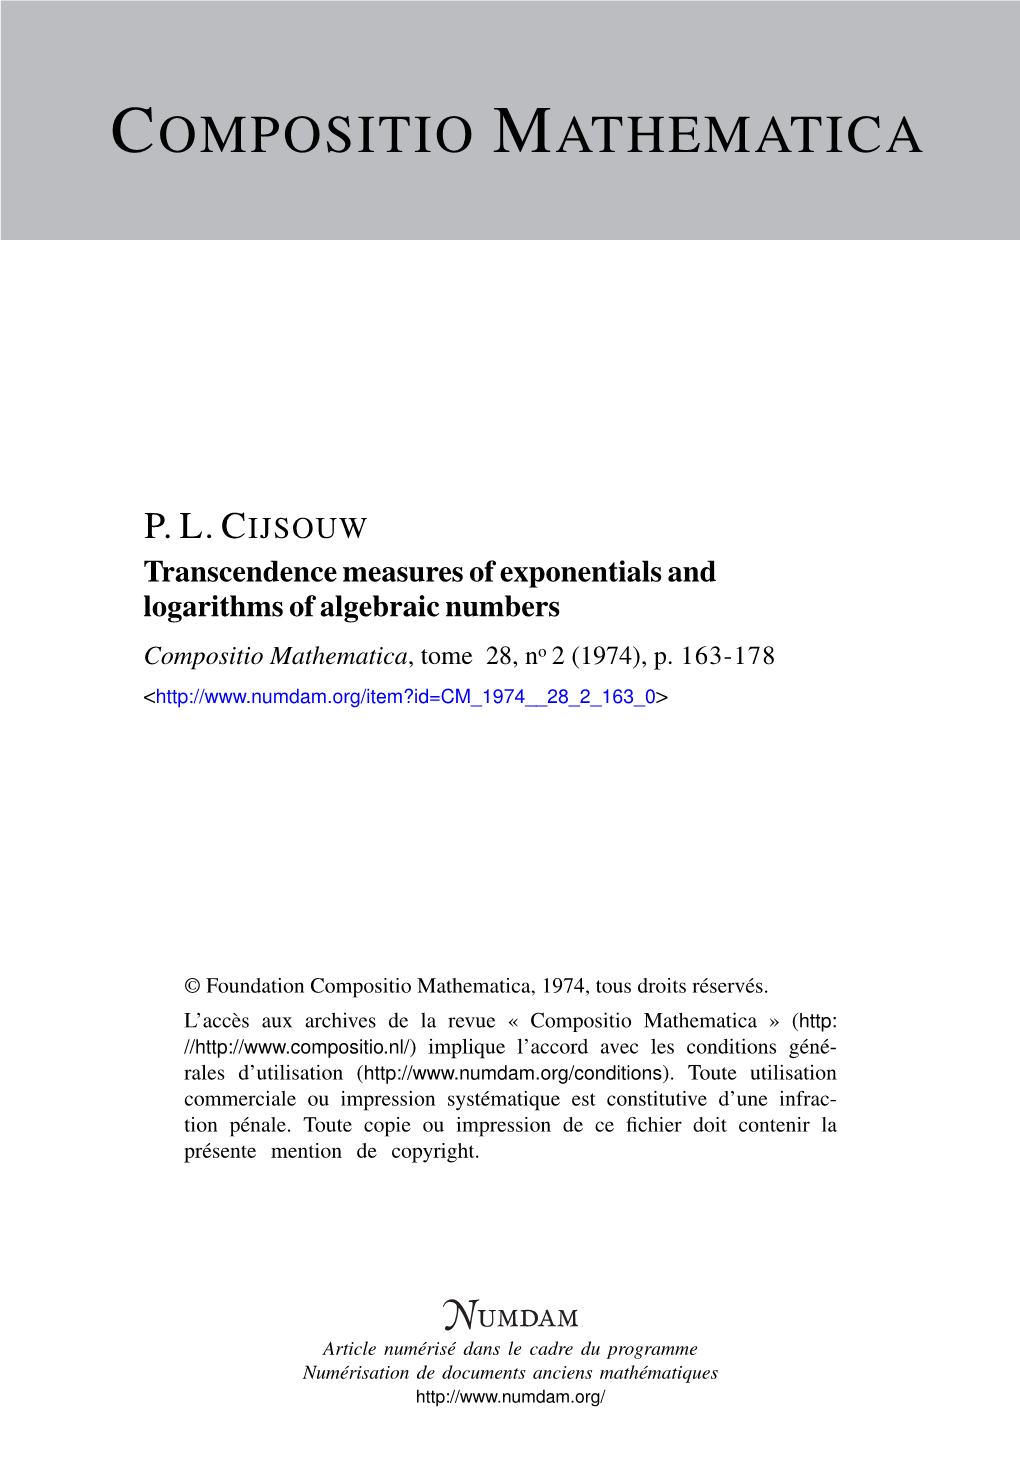 Transcendence Measures of Exponentials and Logarithms of Algebraic Numbers Compositio Mathematica, Tome 28, No 2 (1974), P